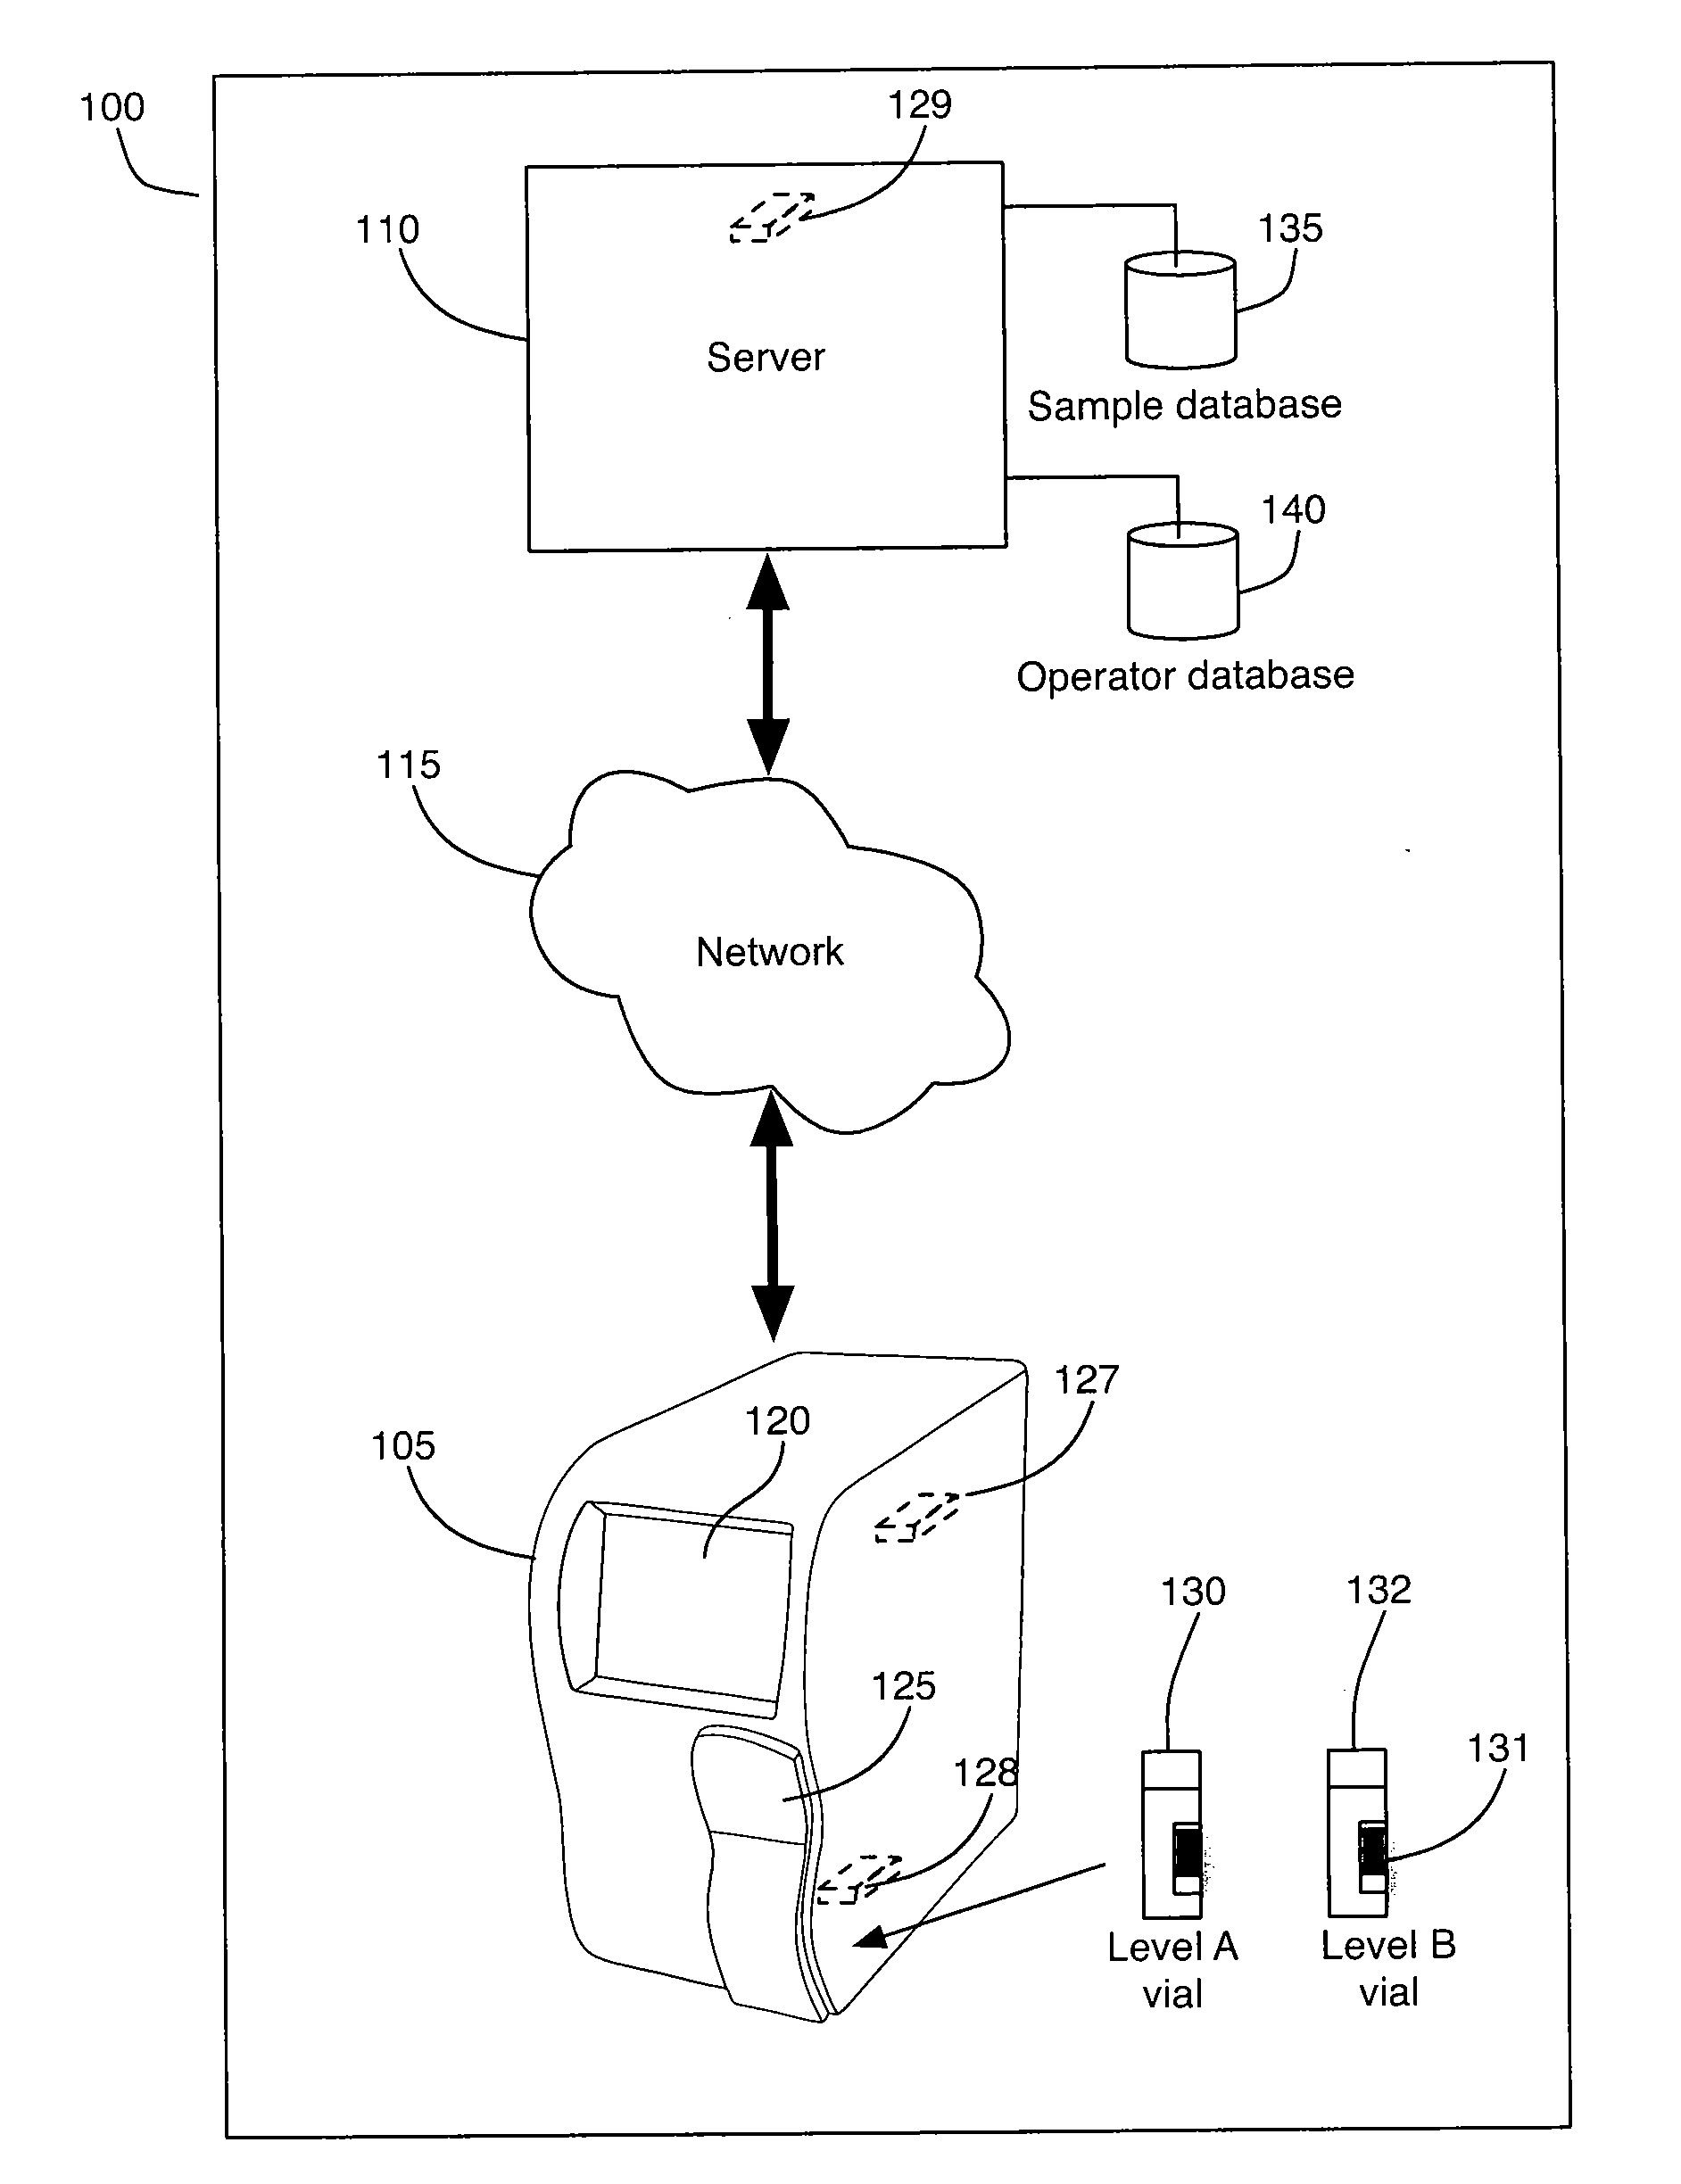 Analyzer, and method for performing a measurement on a sample